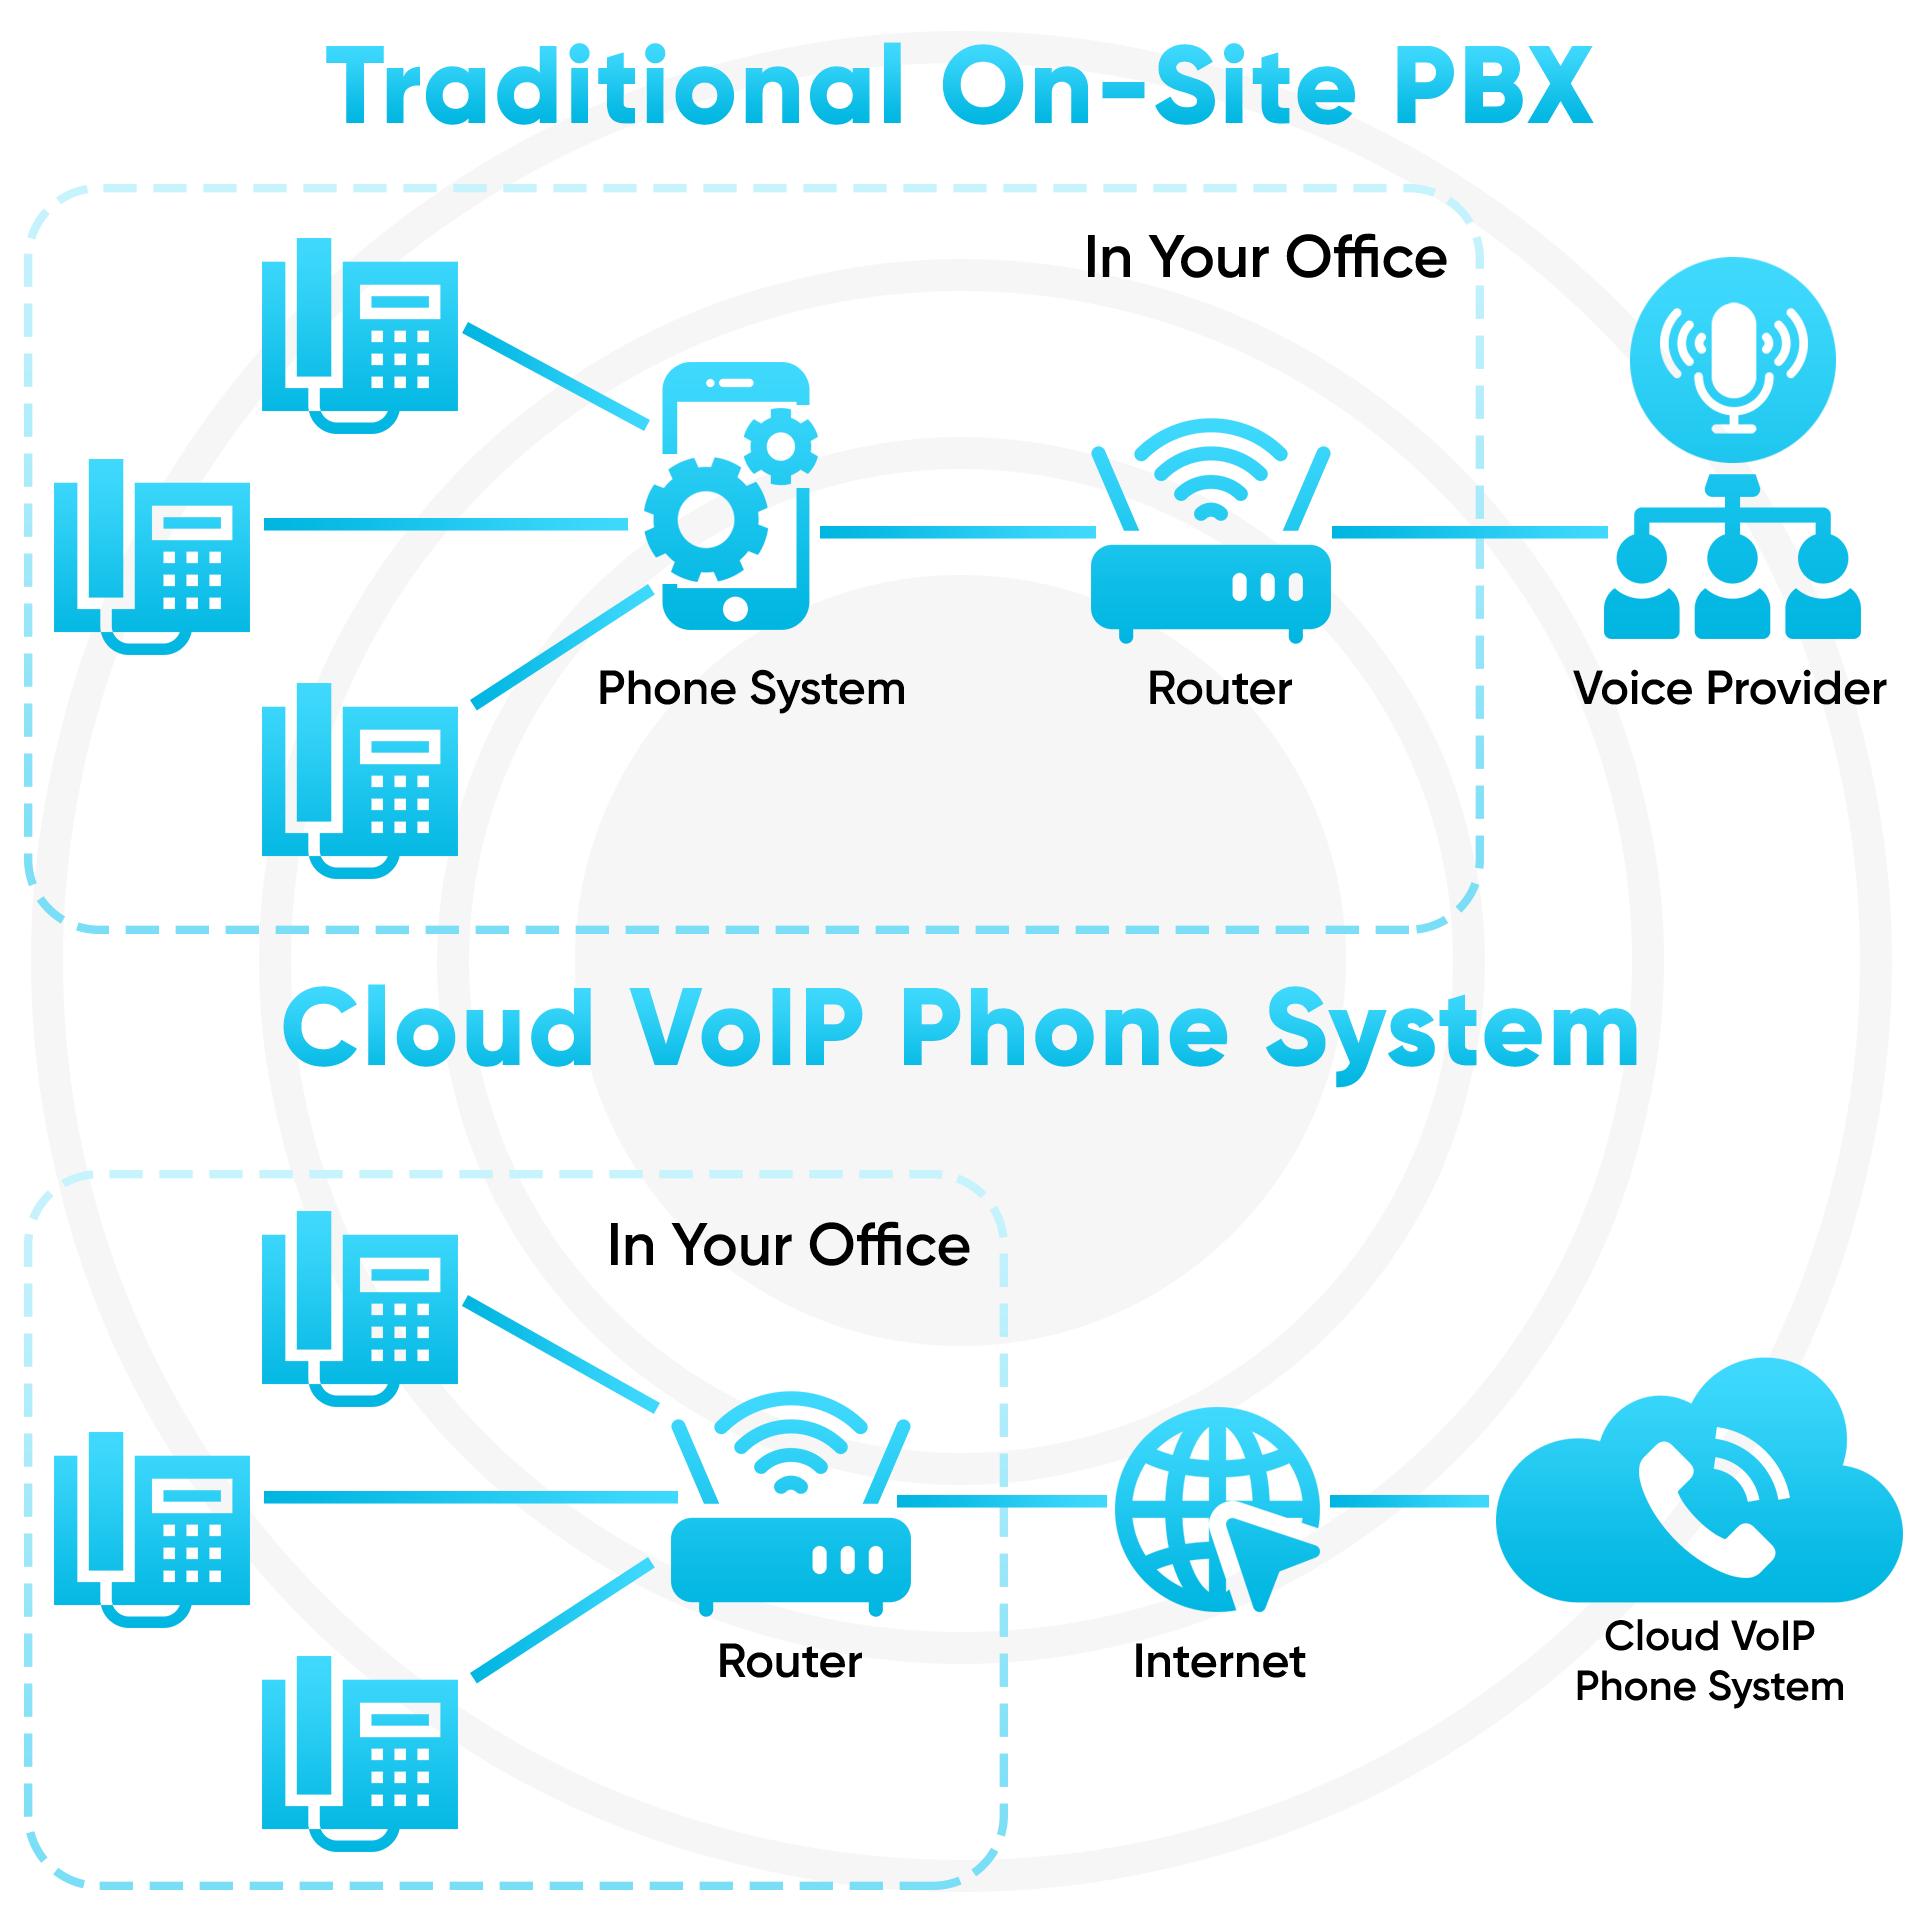 tradition on site pbx vs cloud voip phone system